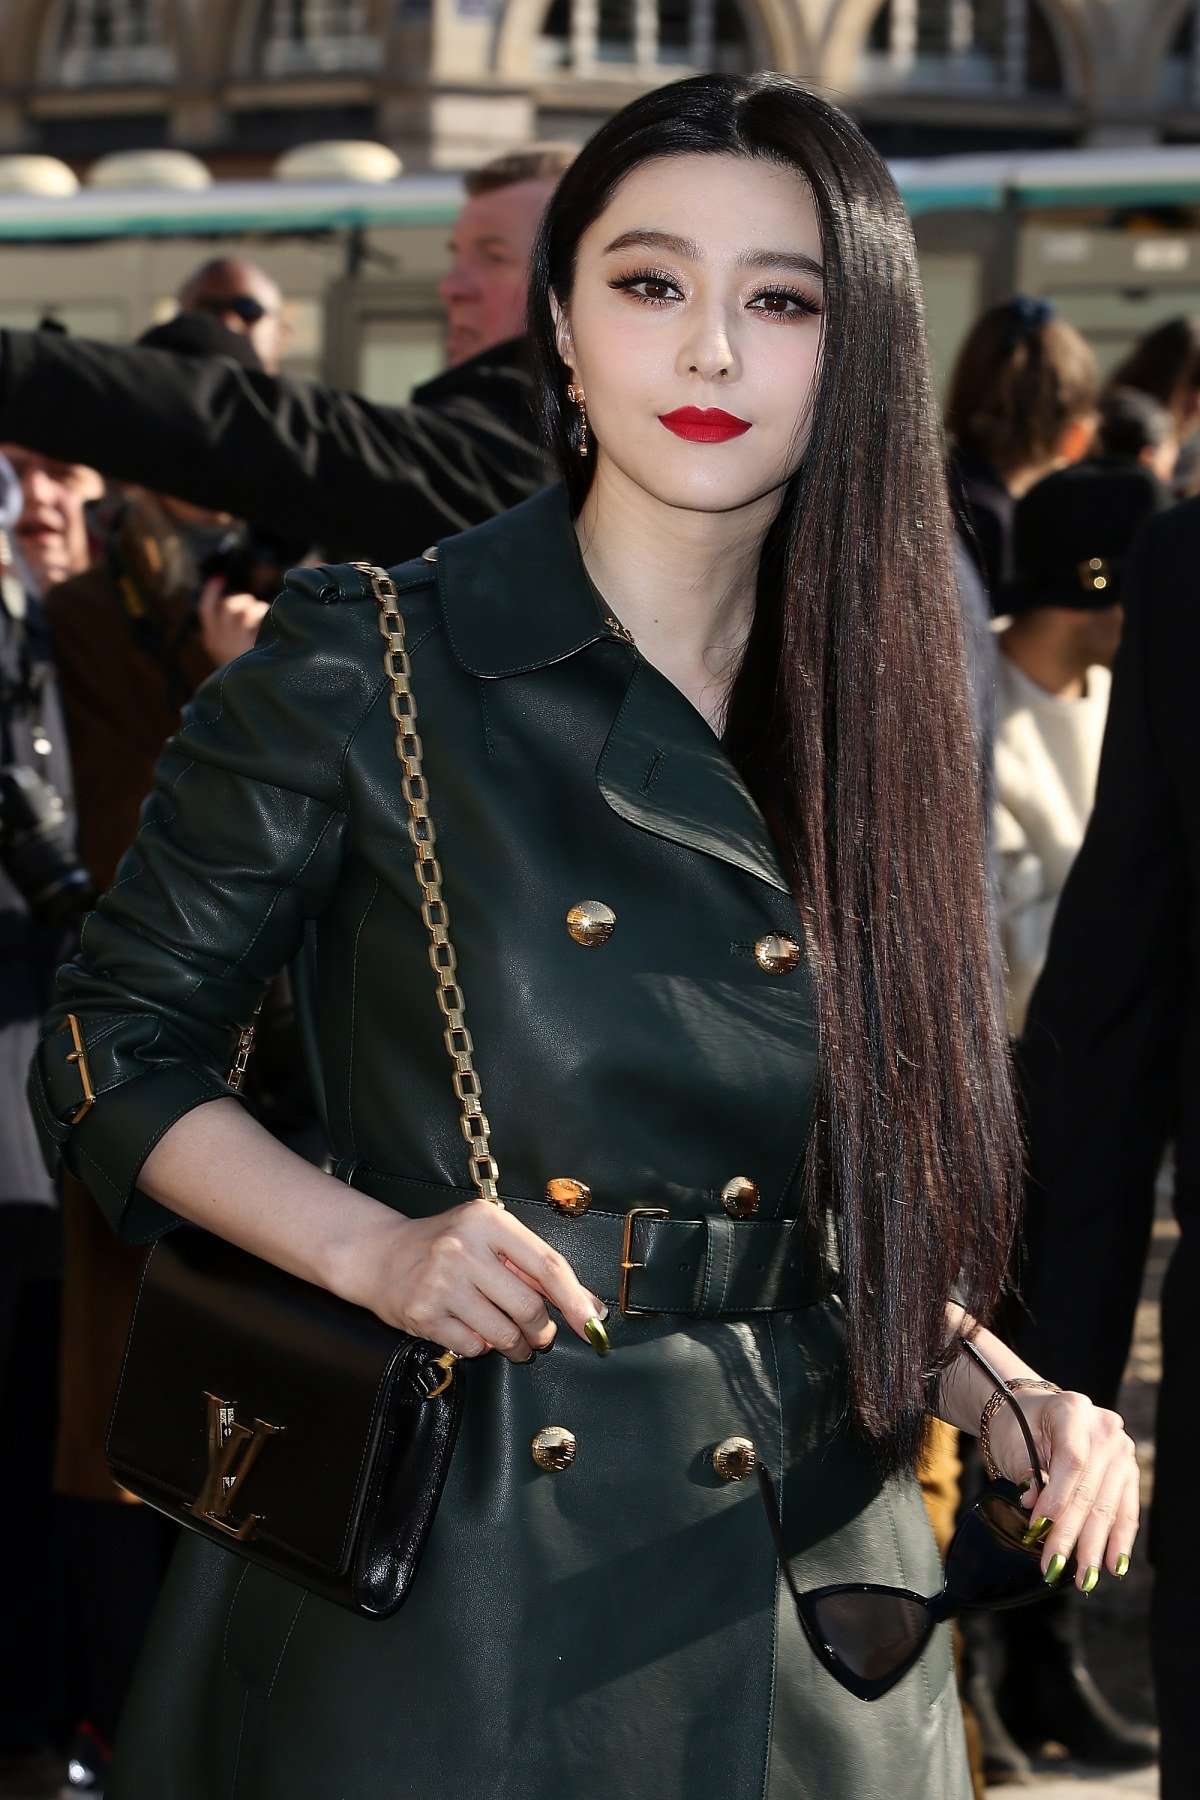 PARIS, FRANCE - MARCH 05:  Fan Bingbing attends Louis Vuitton show as part of the Paris Fashion Week Womenswear Fall/Winter 2014-2015 on March 5, 2014 in Paris, France.  (Photo by Pierre Suu/Getty Images)